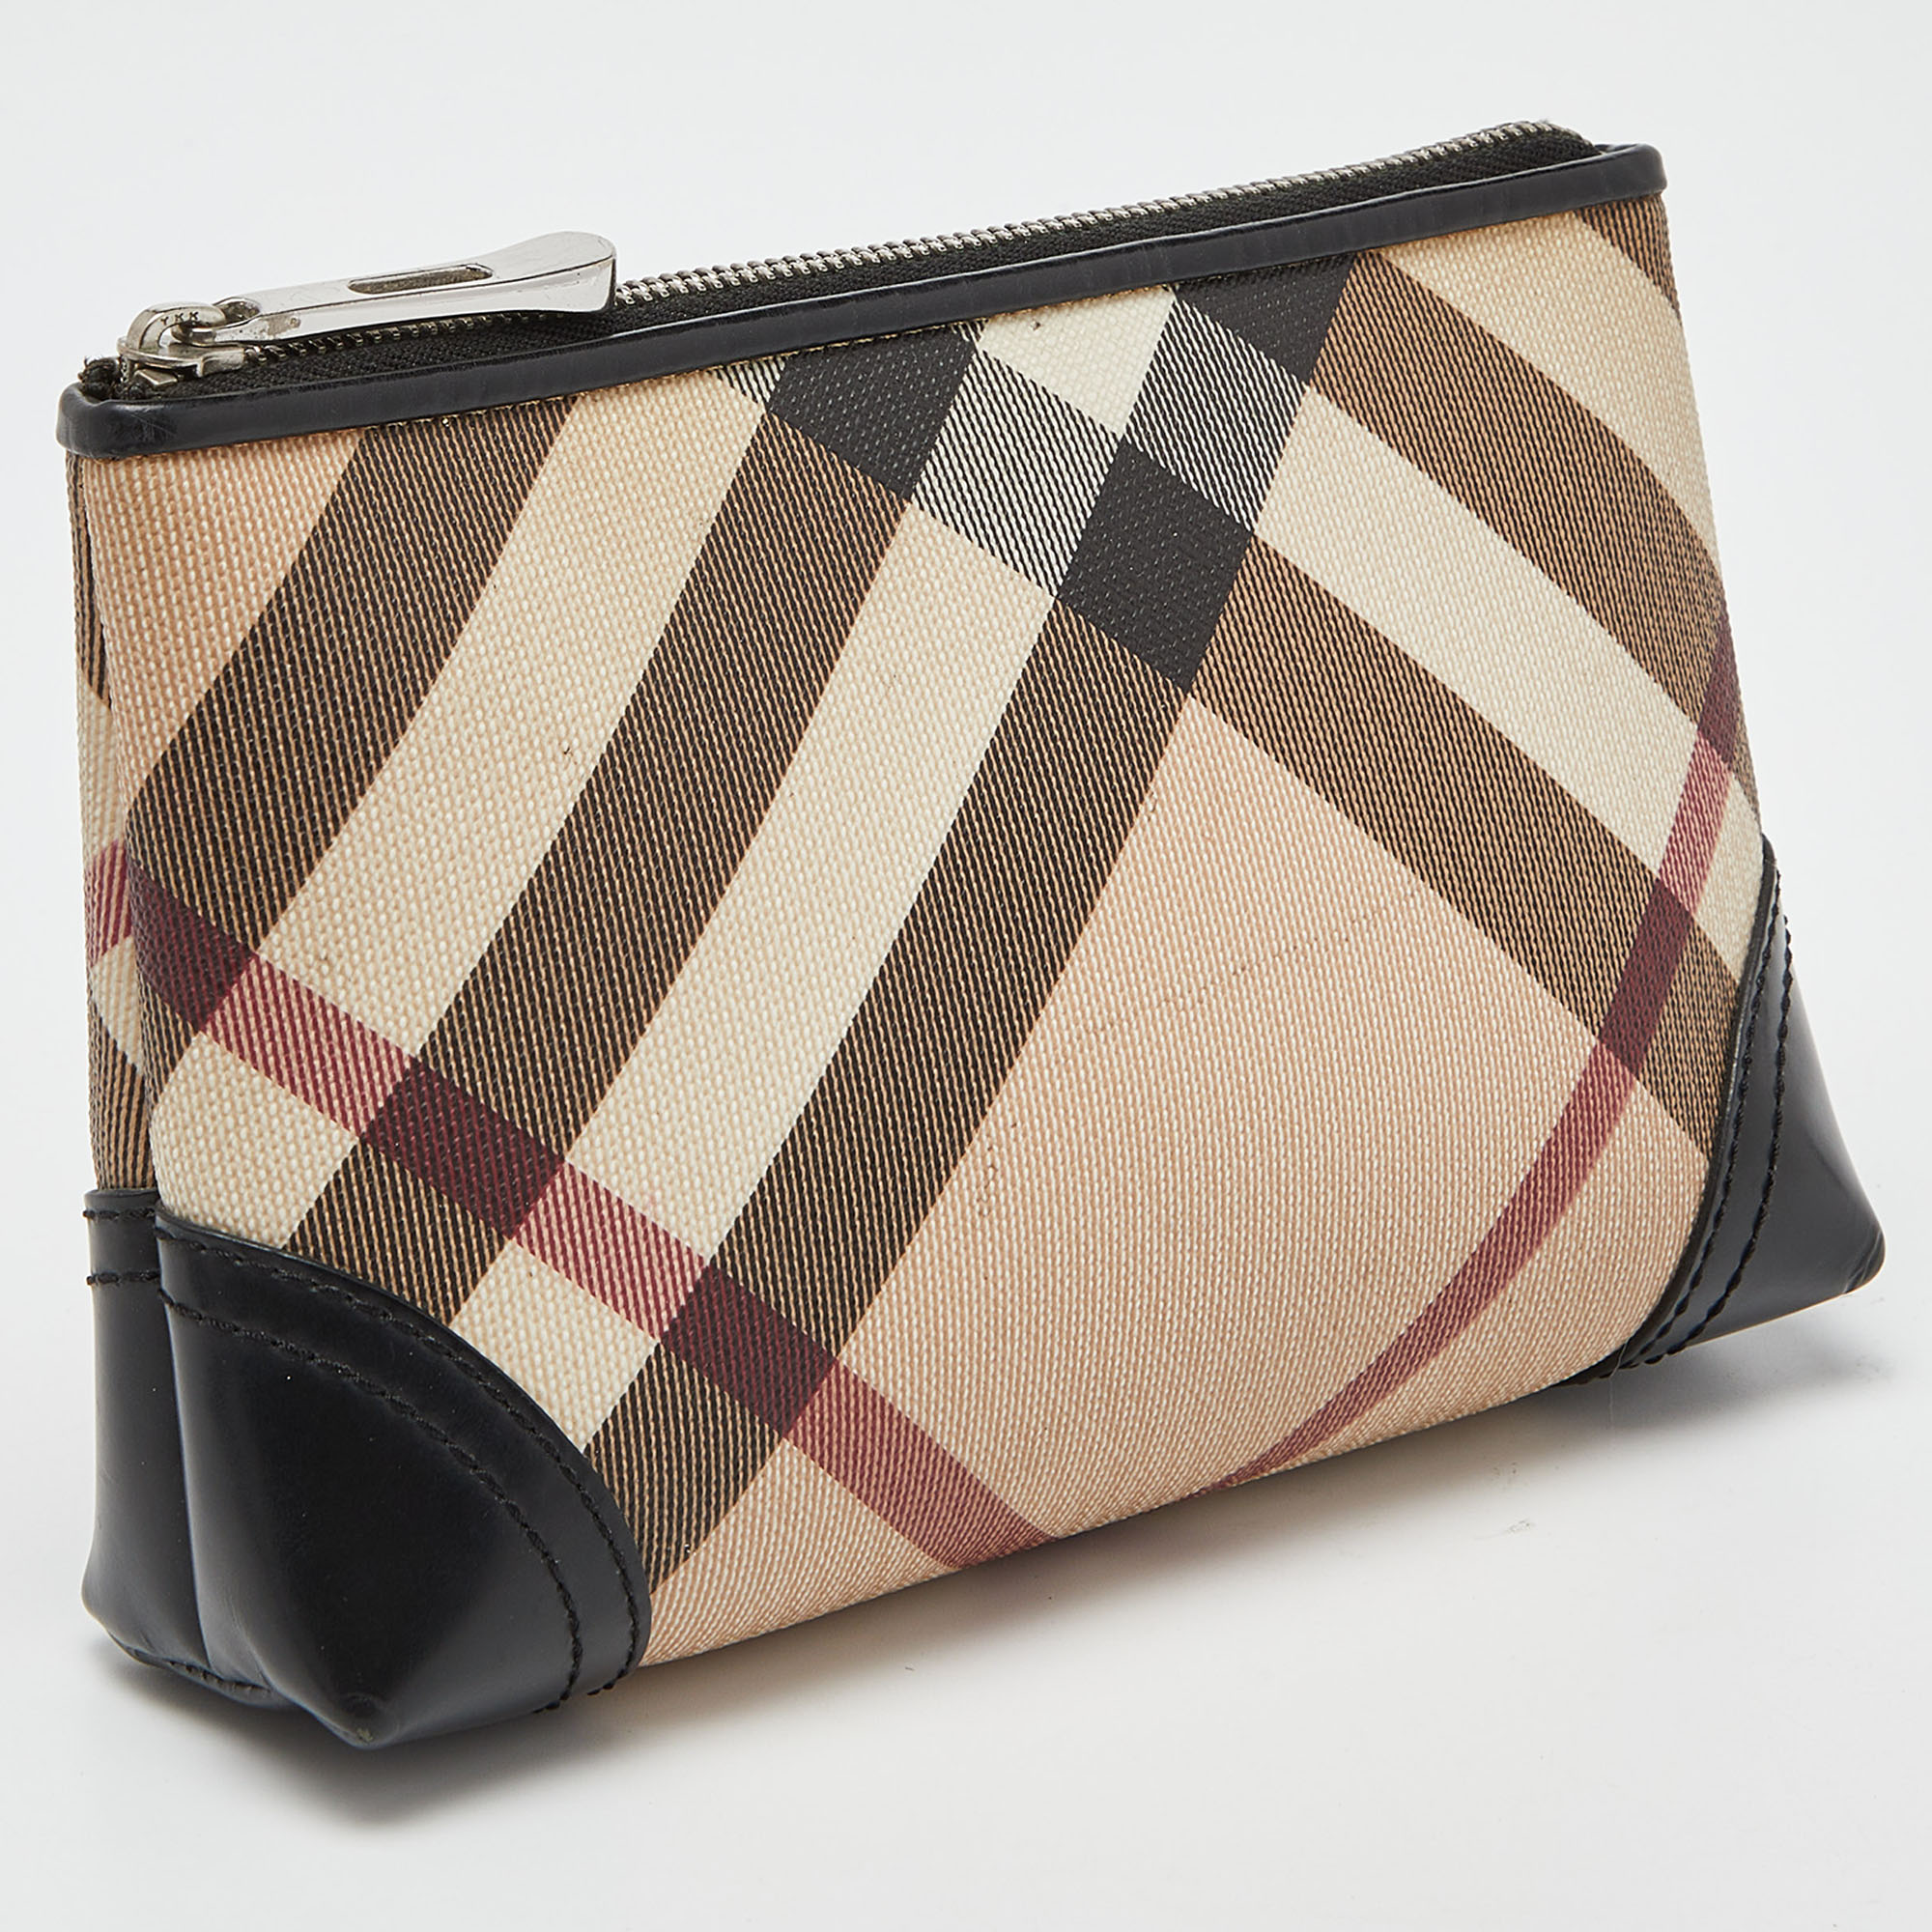 Burberry Beige/Black Nova Check Coated Canvas And Patent Leather Pouch